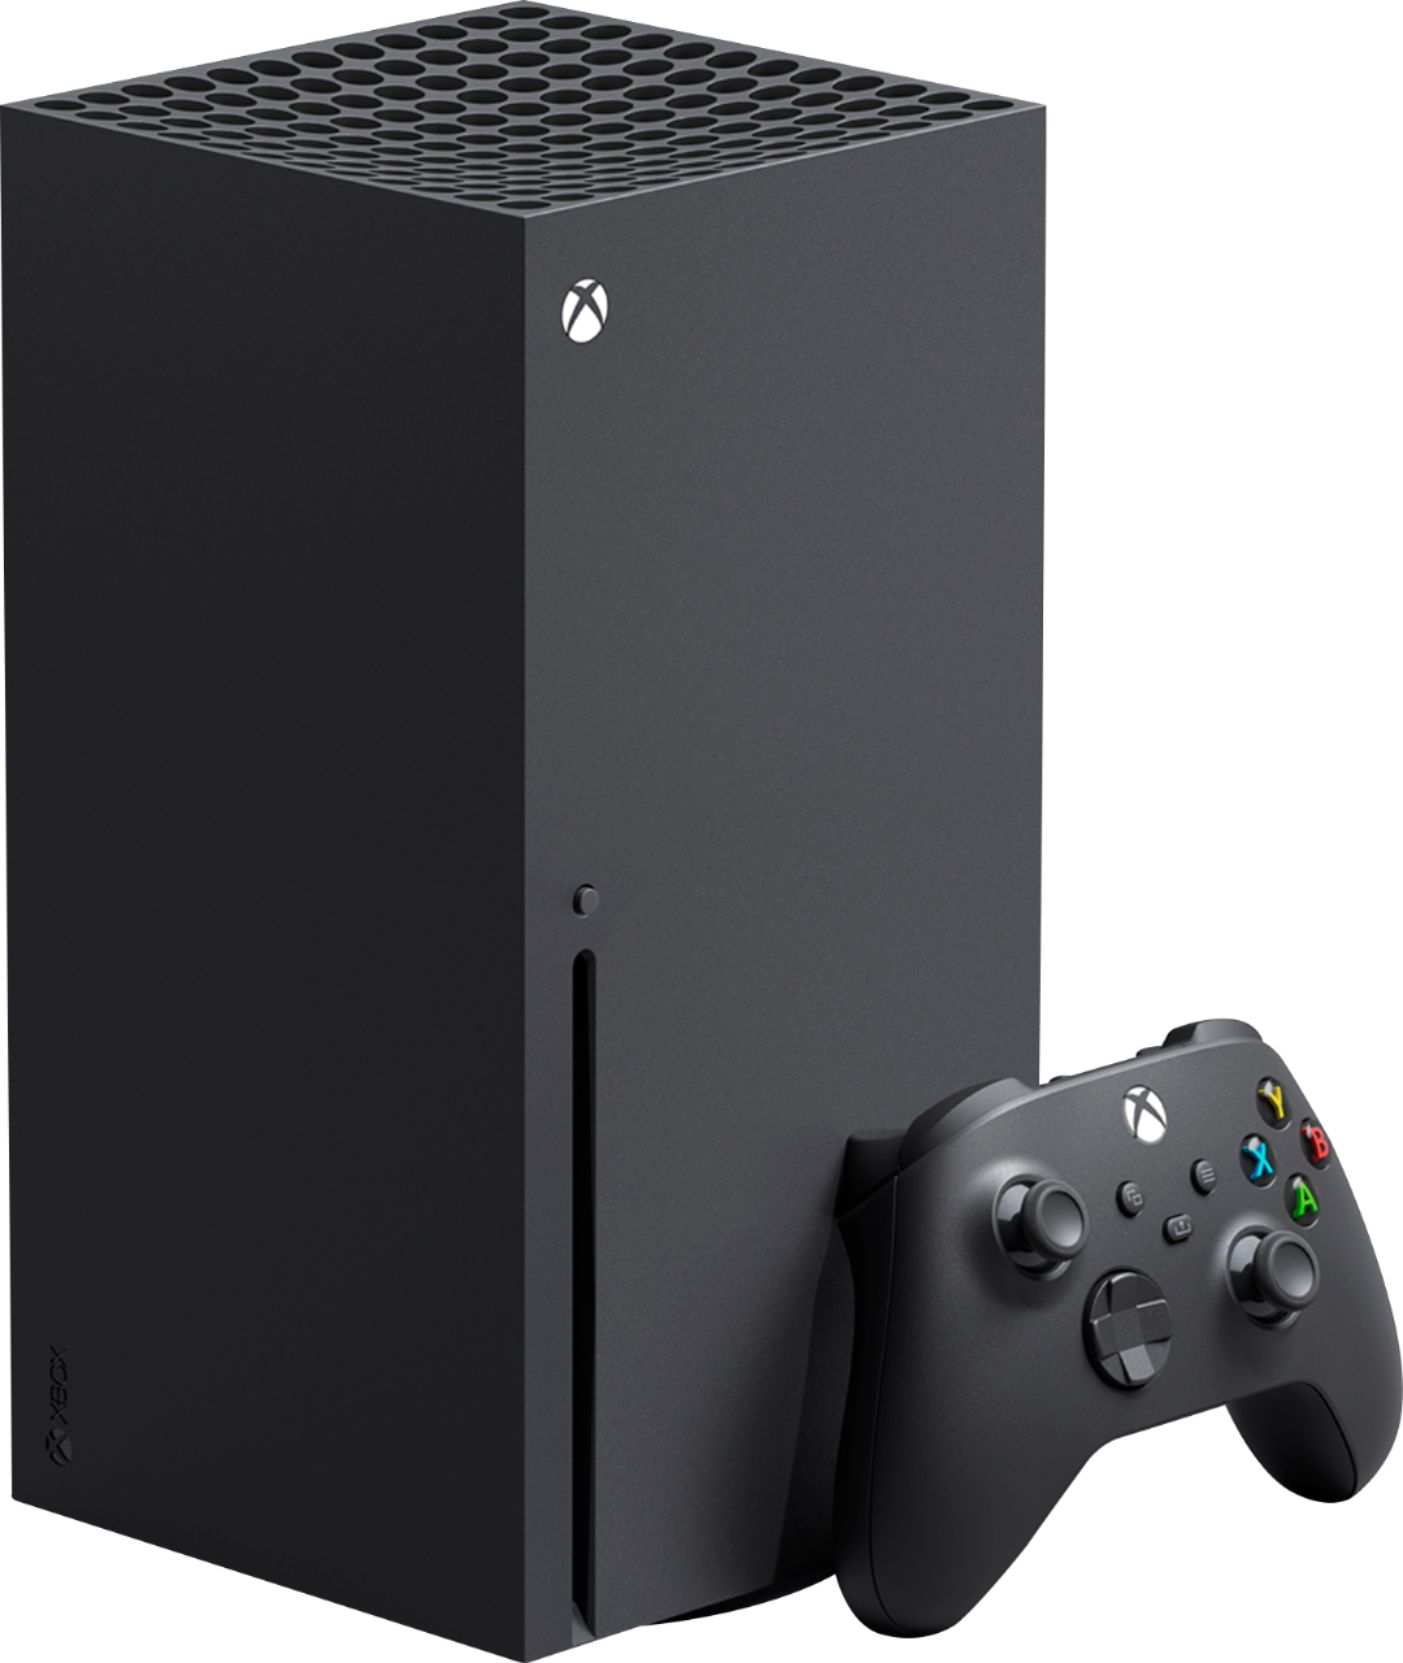 Xbox Series X vs Xbox Series S: What's The Difference? - Tech Advisor